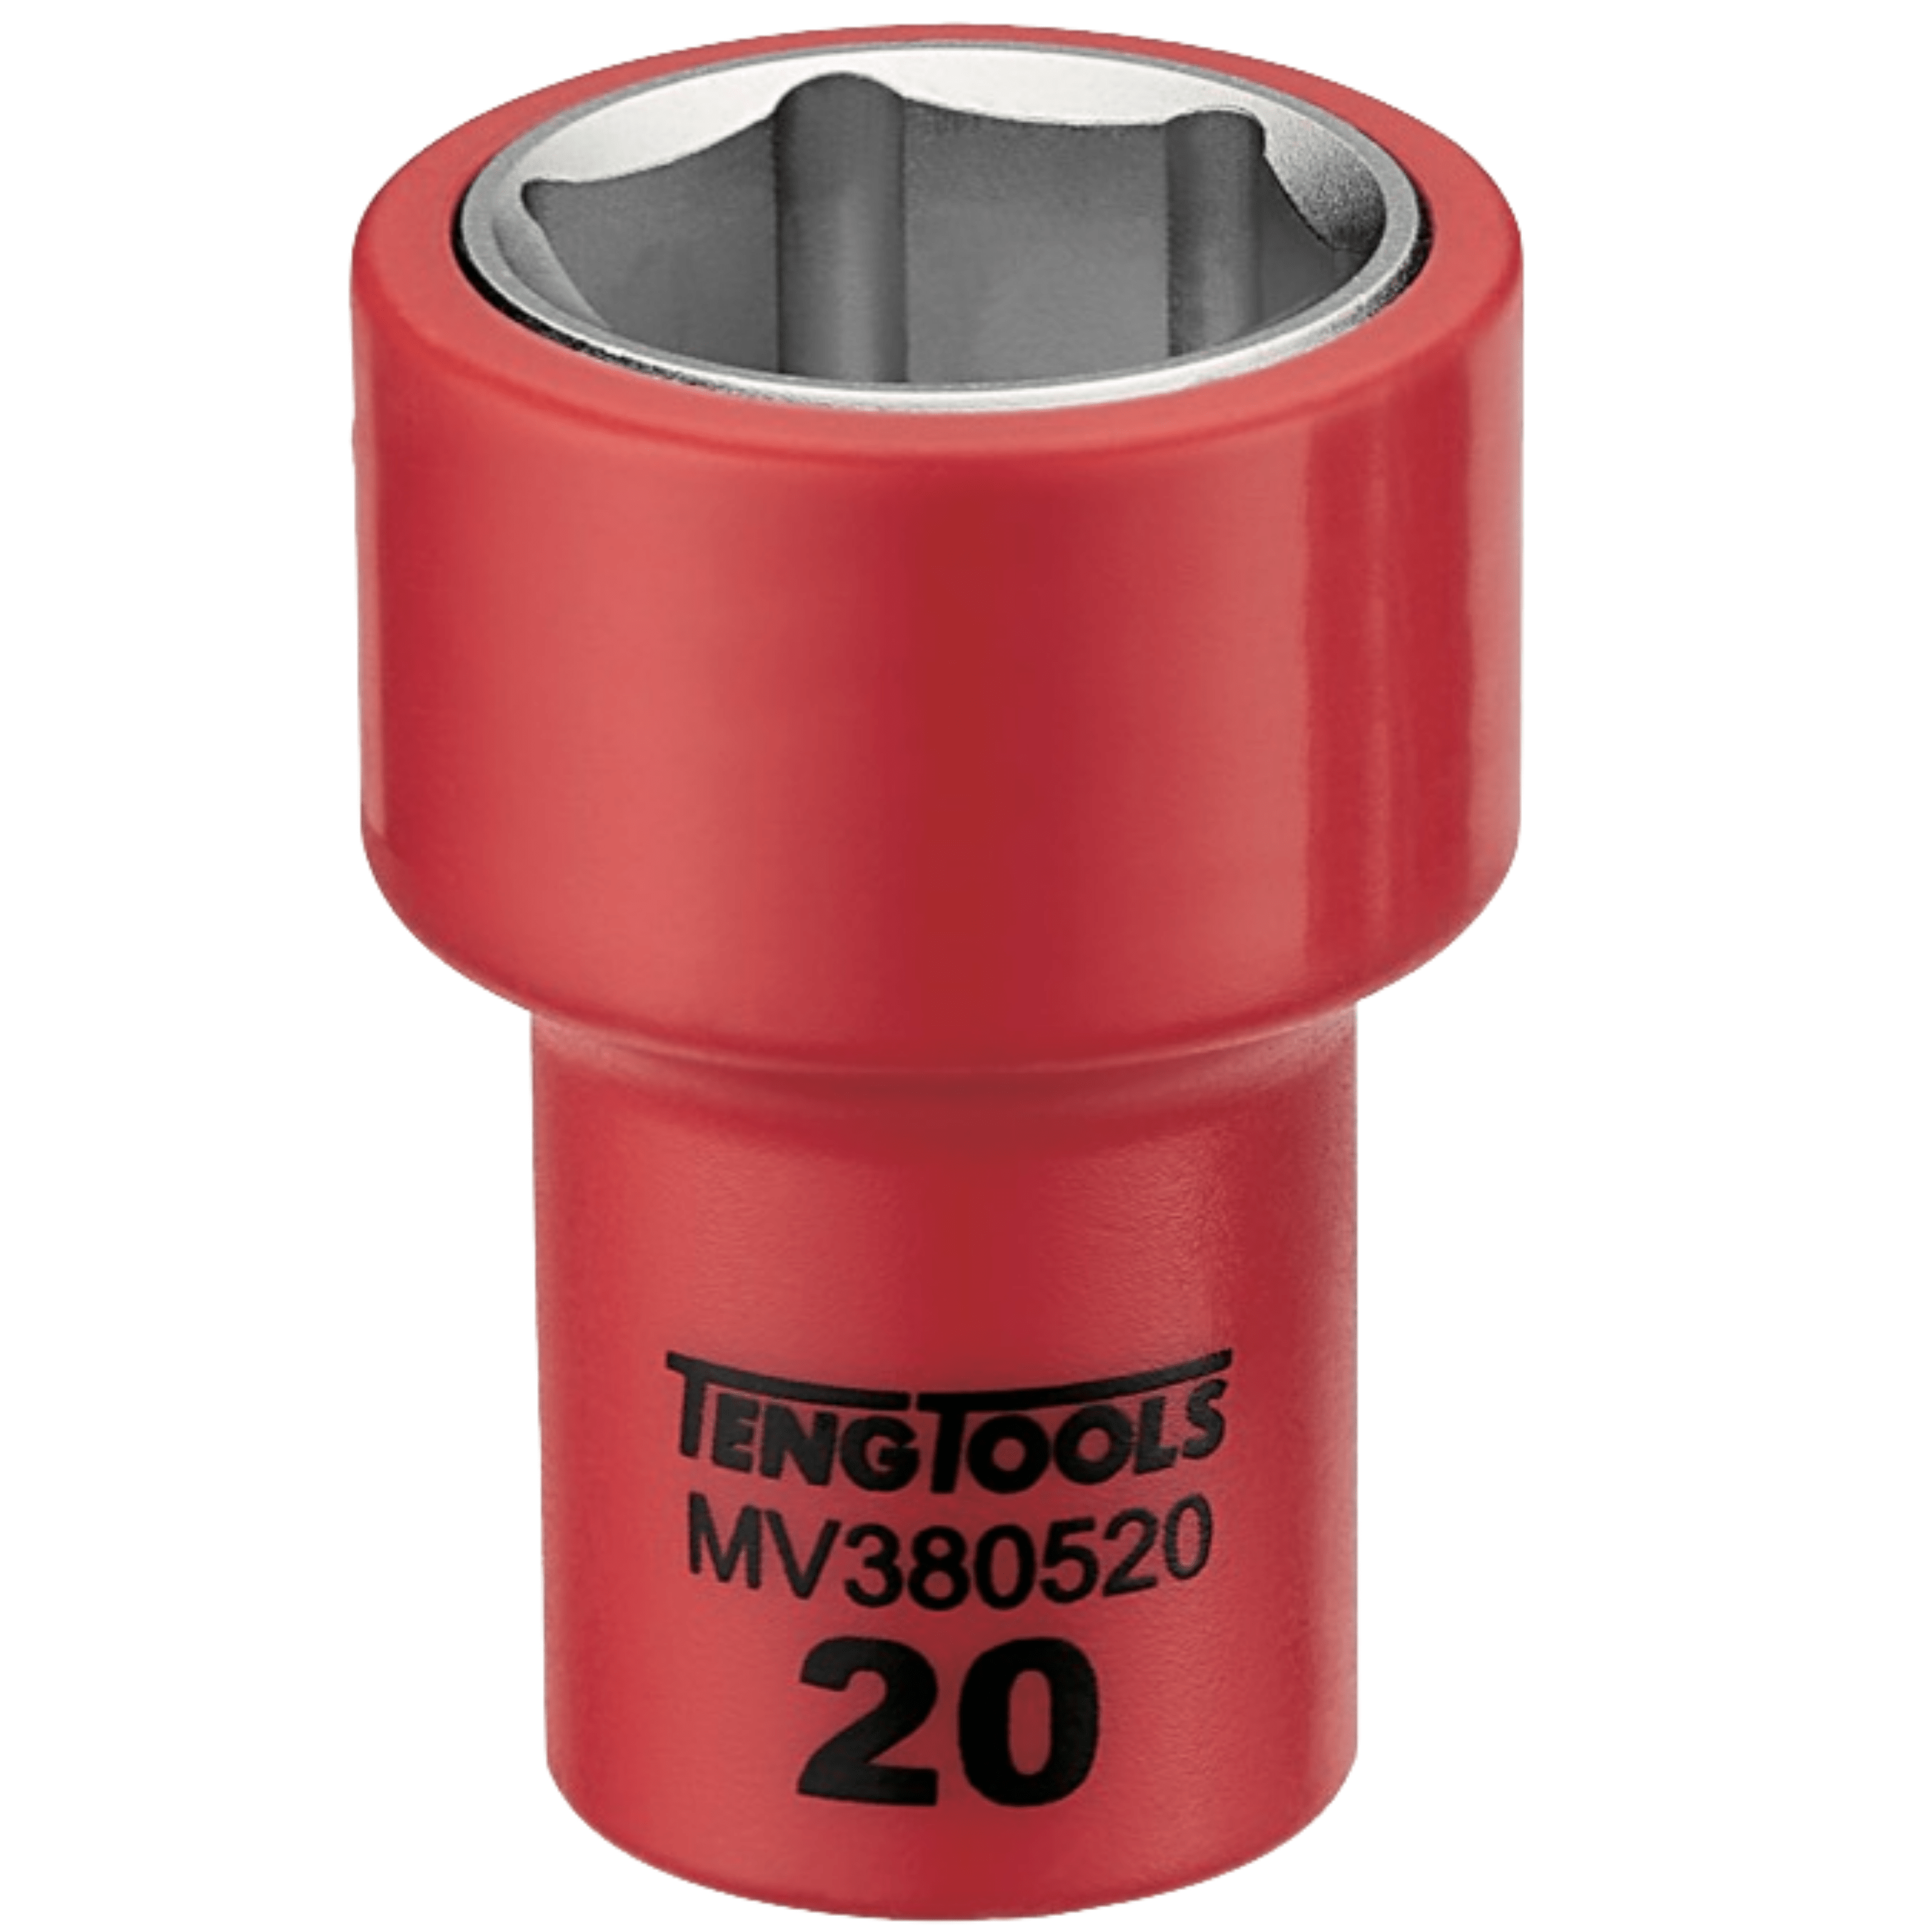 Teng Tools 3/8 Inch Drive Metric 6 Point 1000 Volt Shallow Insulated Sockets - 6mm